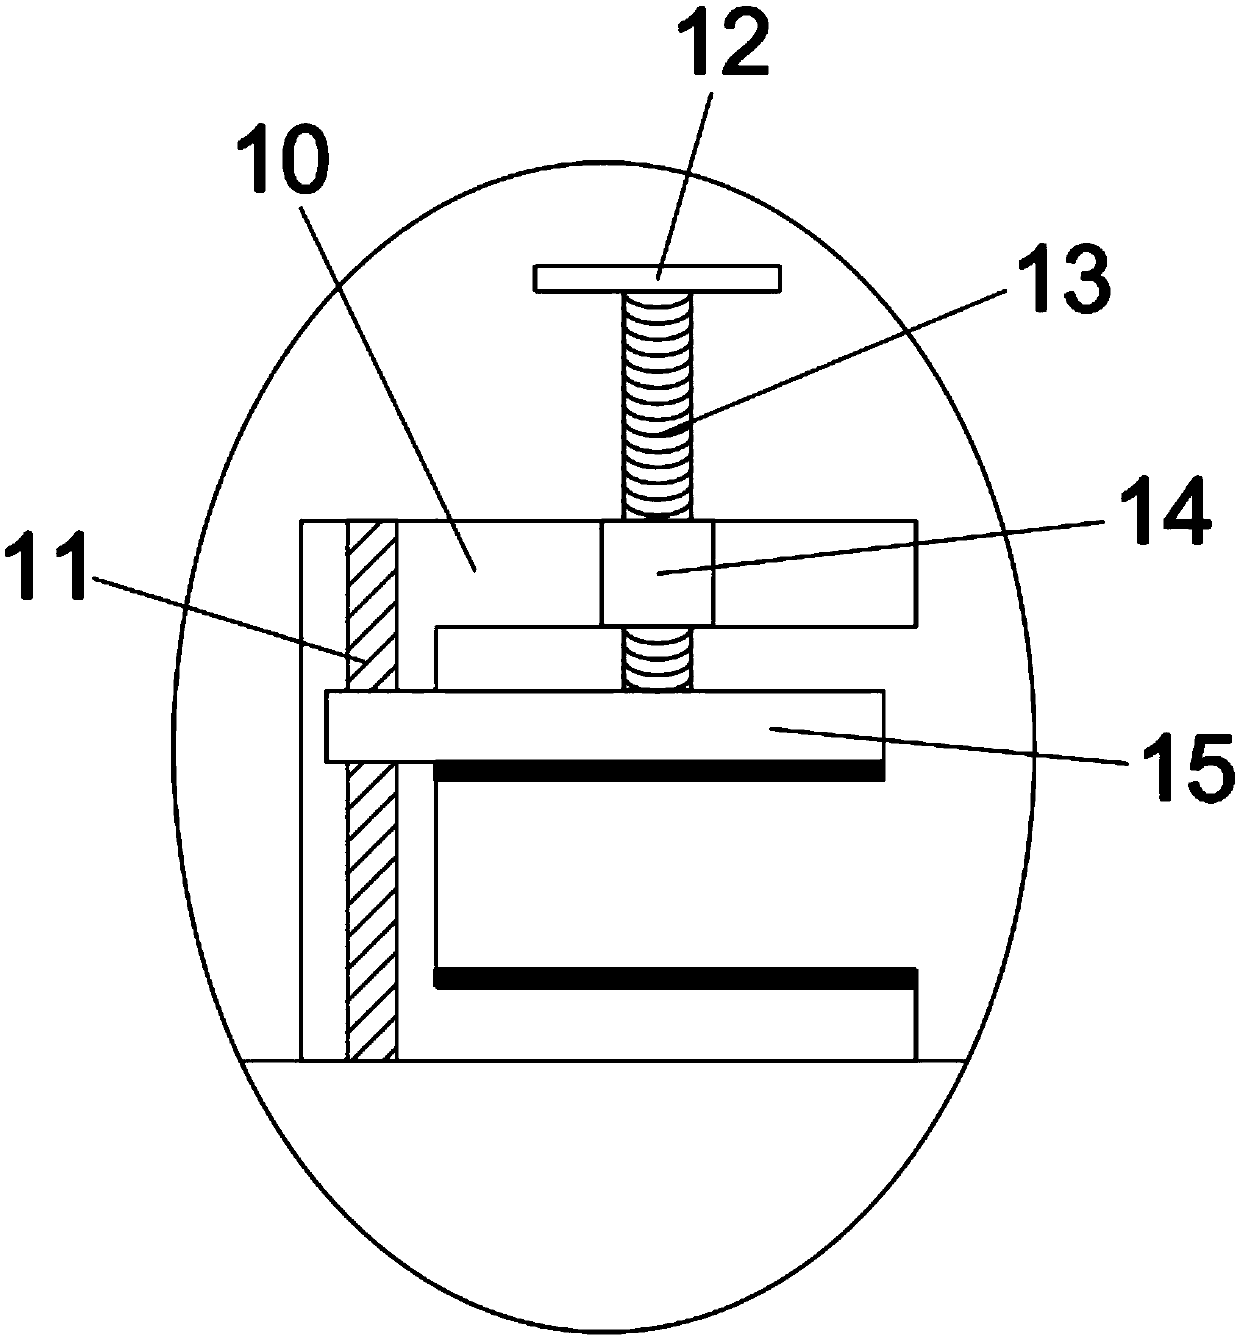 Building material hardness detecting device